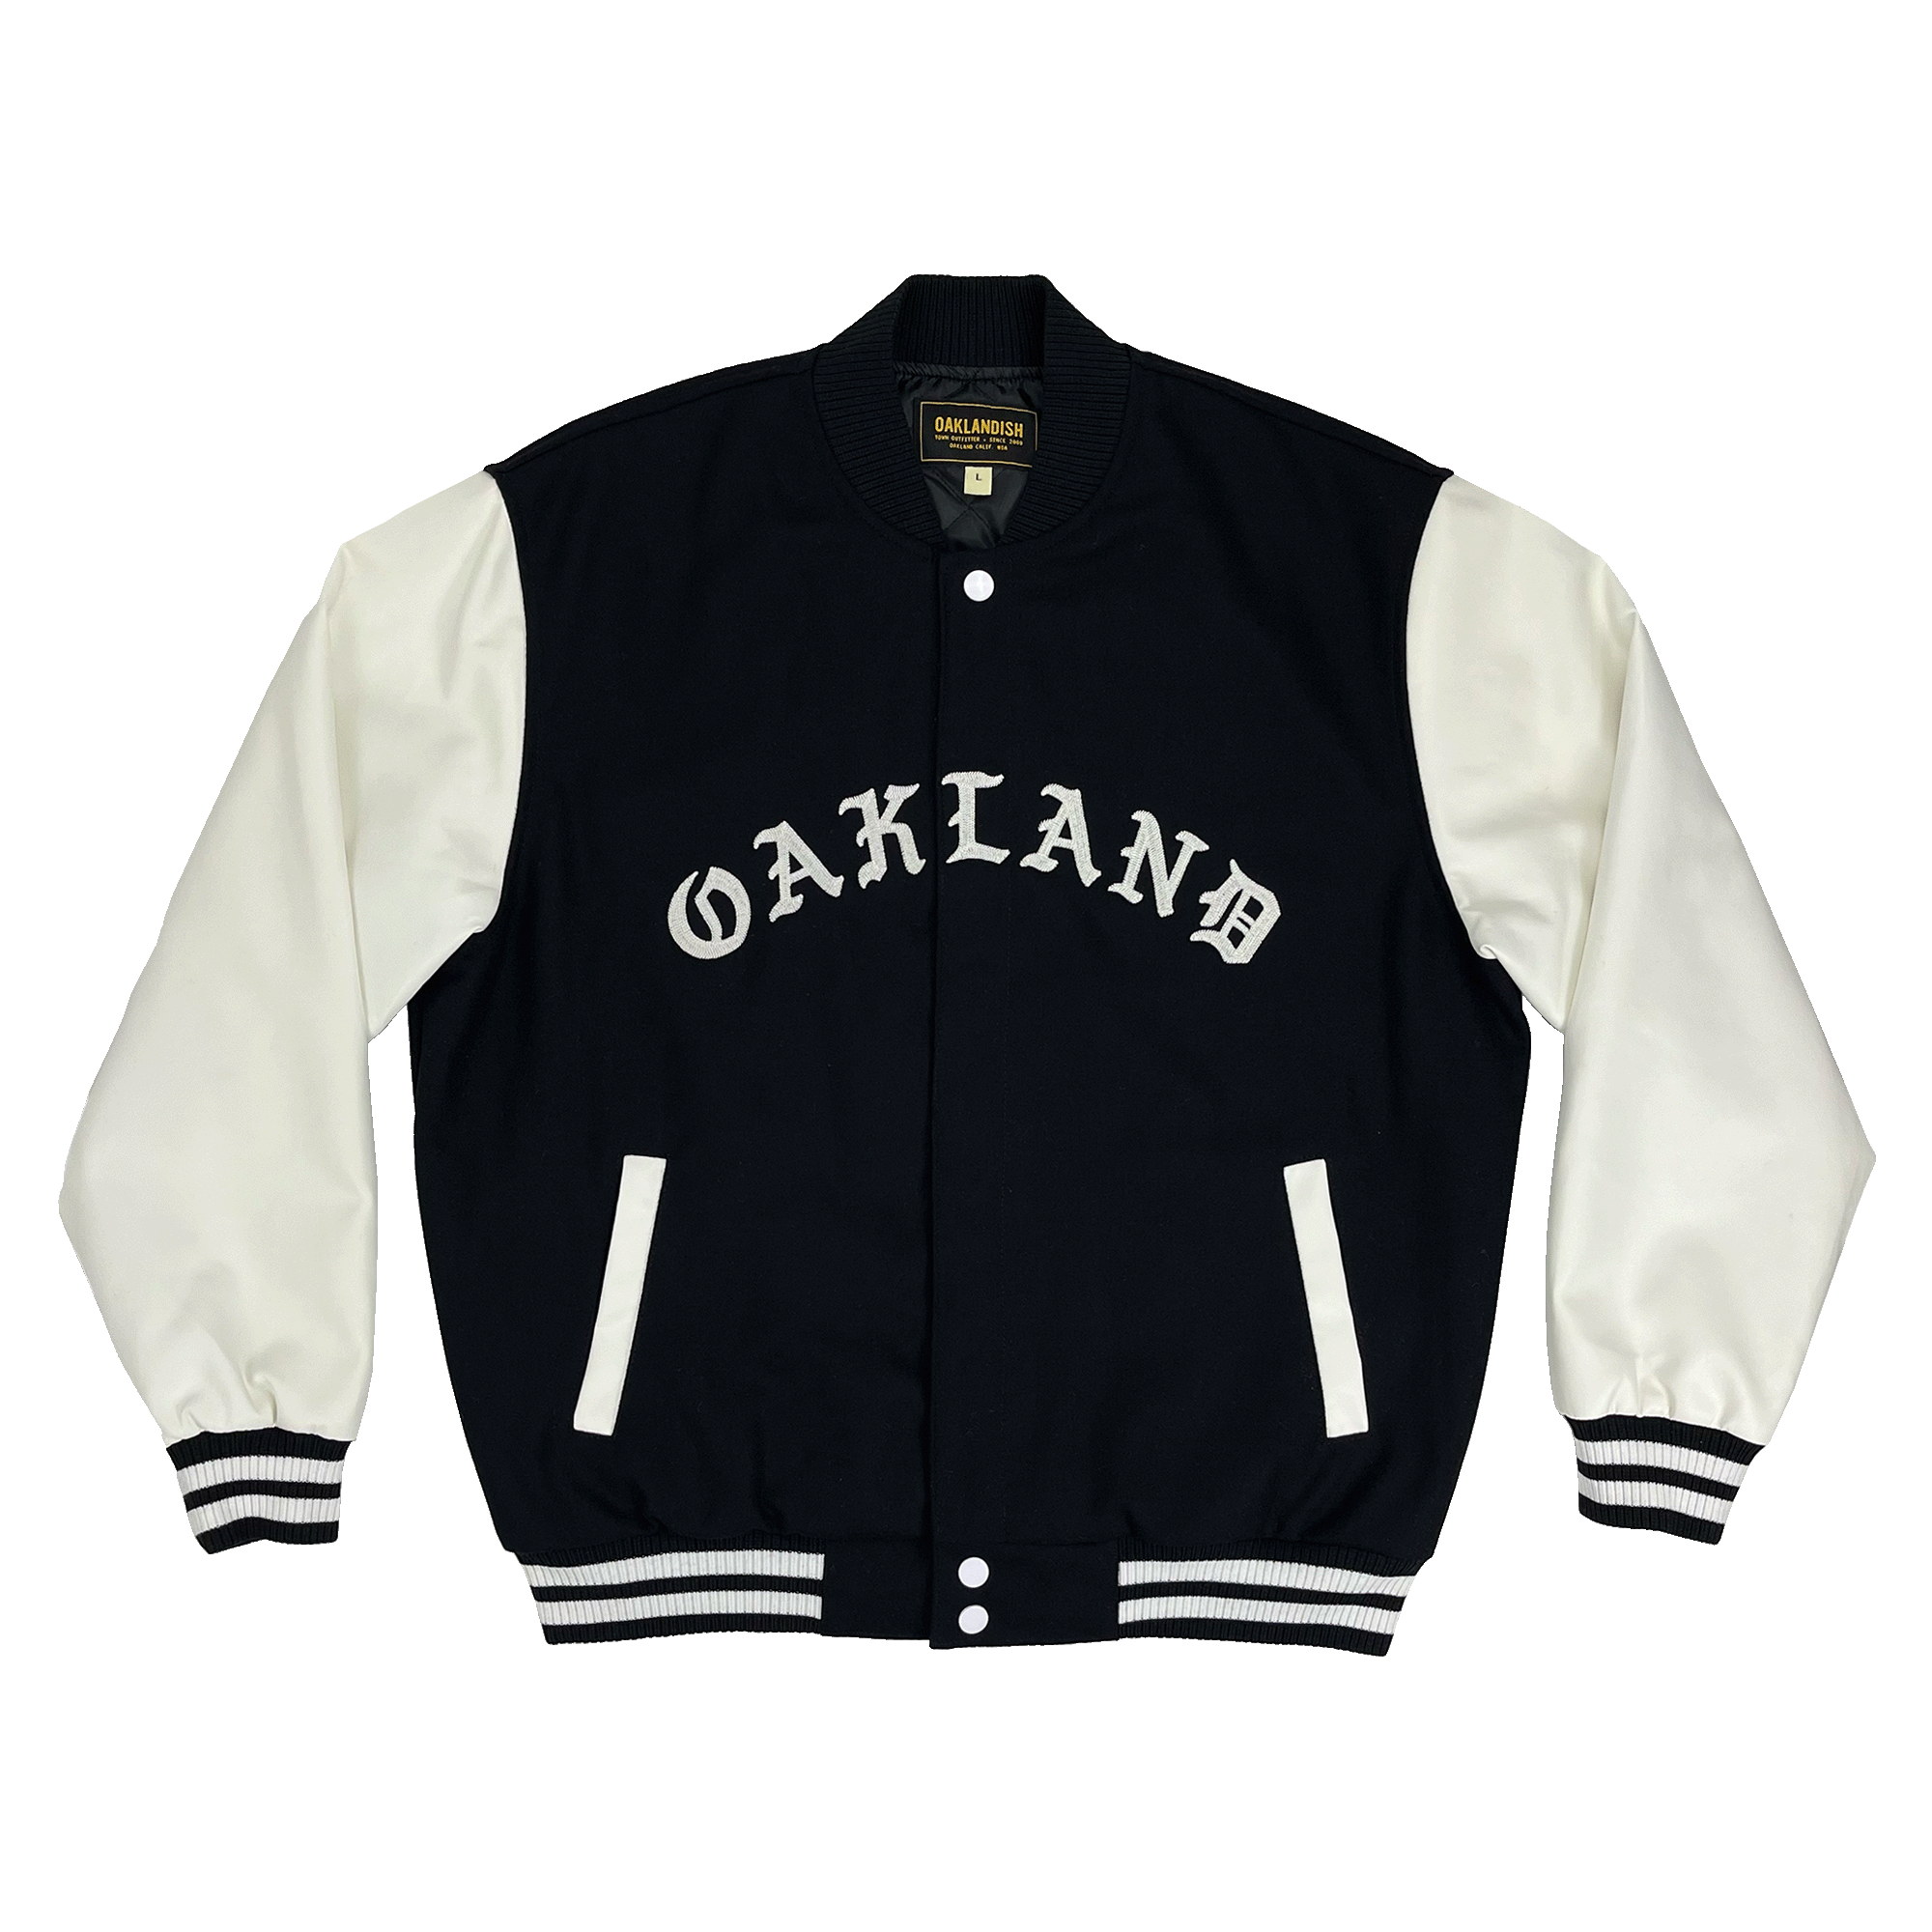 Front-view of a black varsity jacket with white sleeves and black and white striped trim with a large white OAKLAND wordmark stitched onto the front chest.